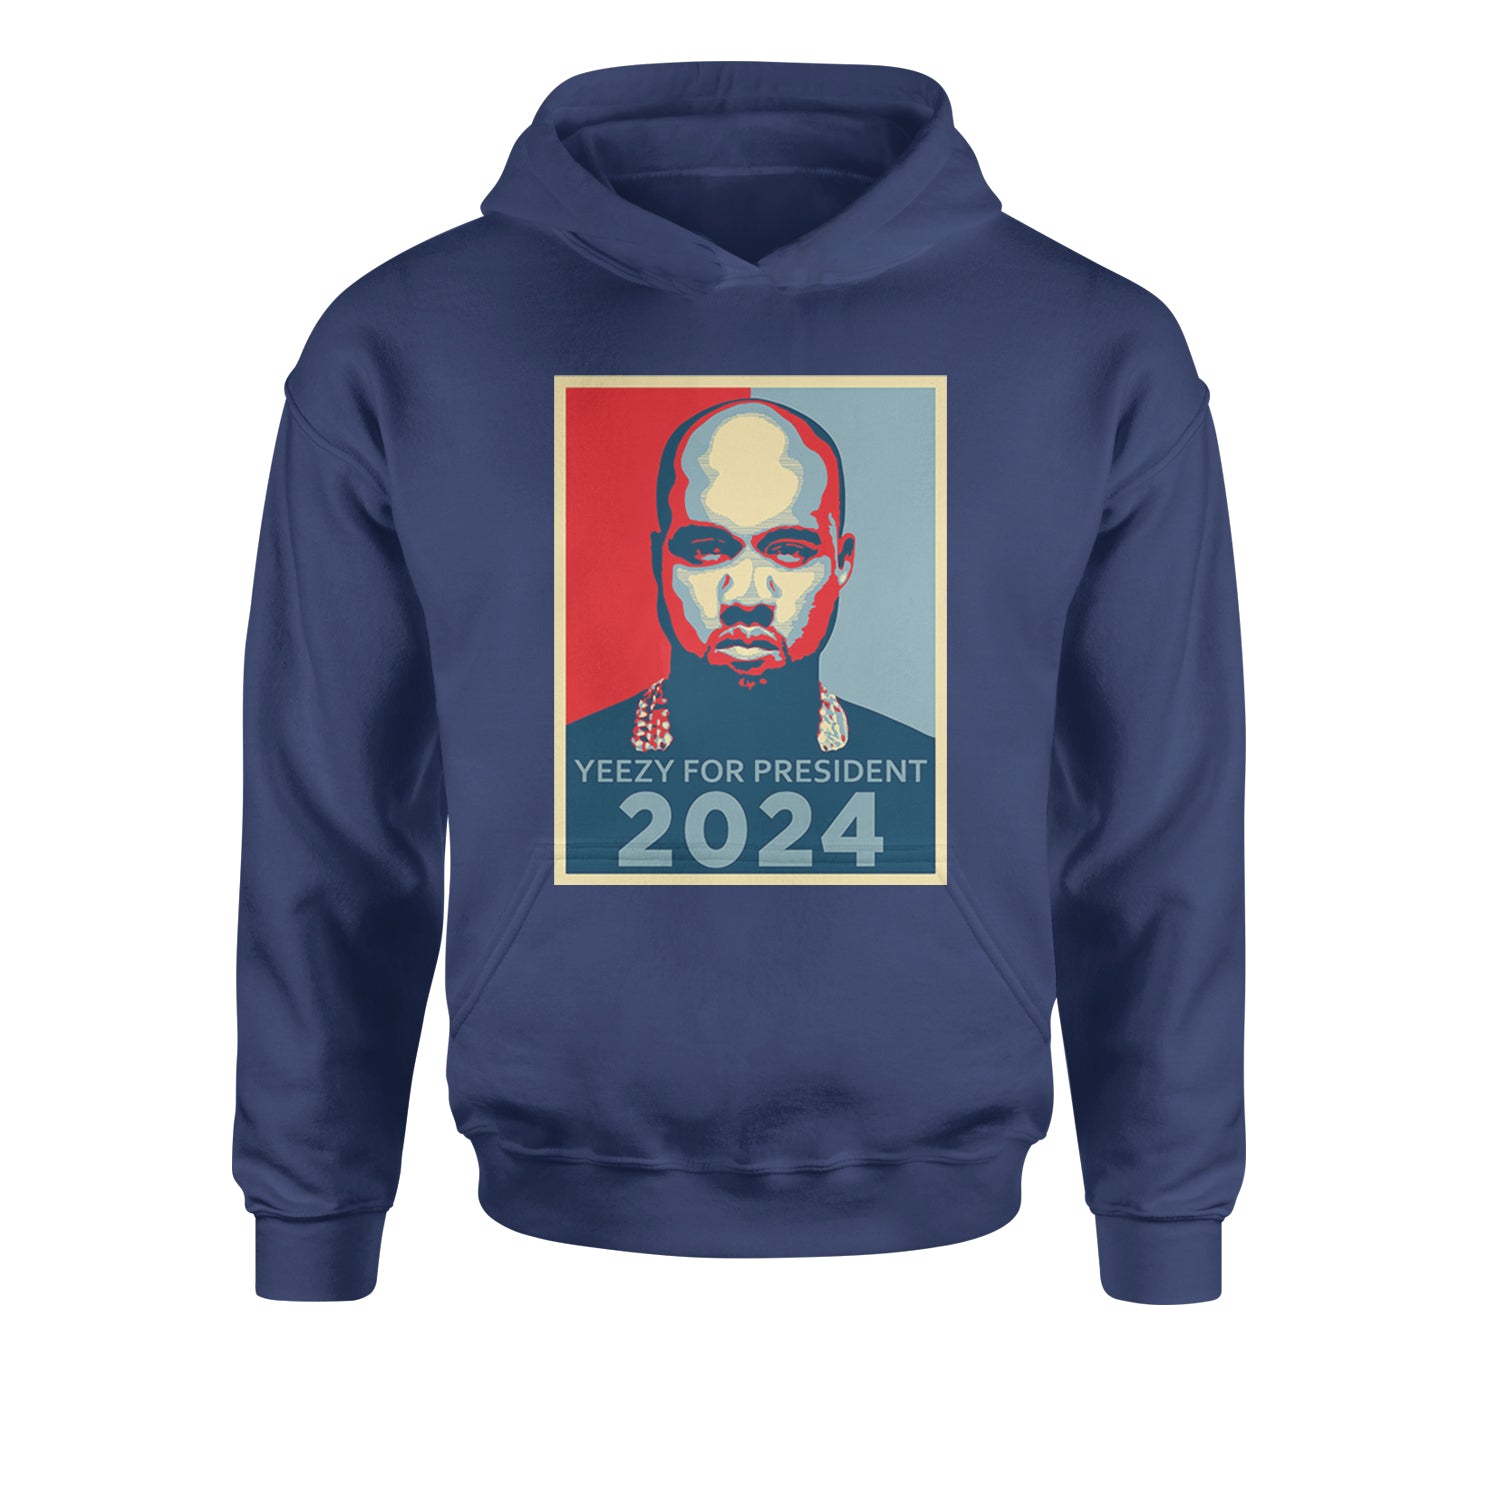 Yeezus For President Vote for Ye Youth-Sized Hoodie Navy Blue